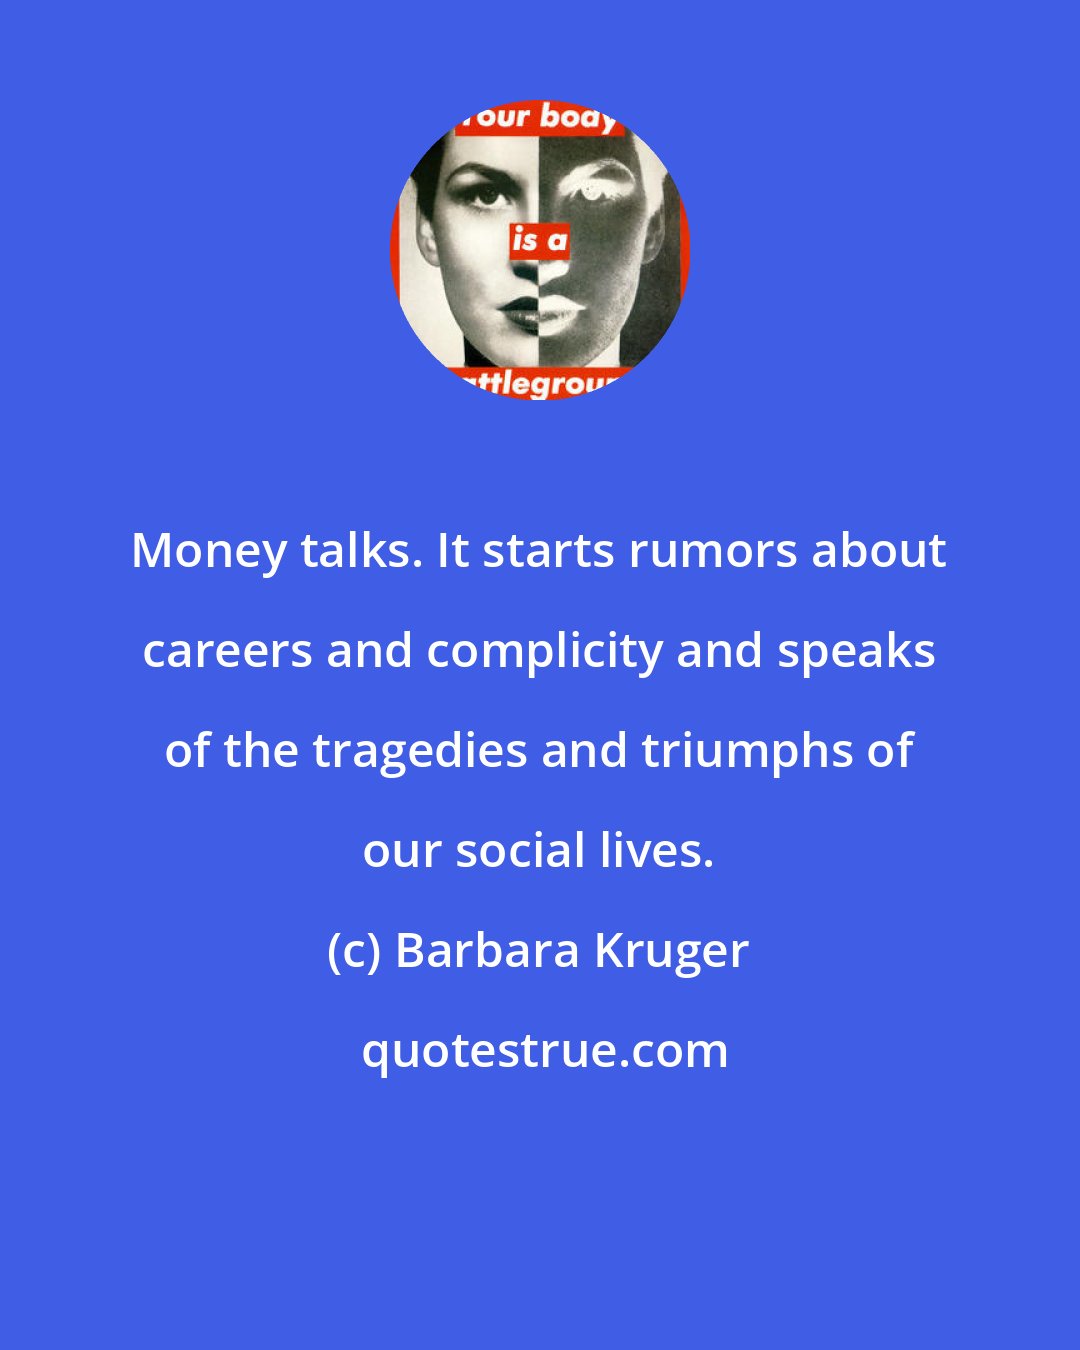 Barbara Kruger: Money talks. It starts rumors about careers and complicity and speaks of the tragedies and triumphs of our social lives.